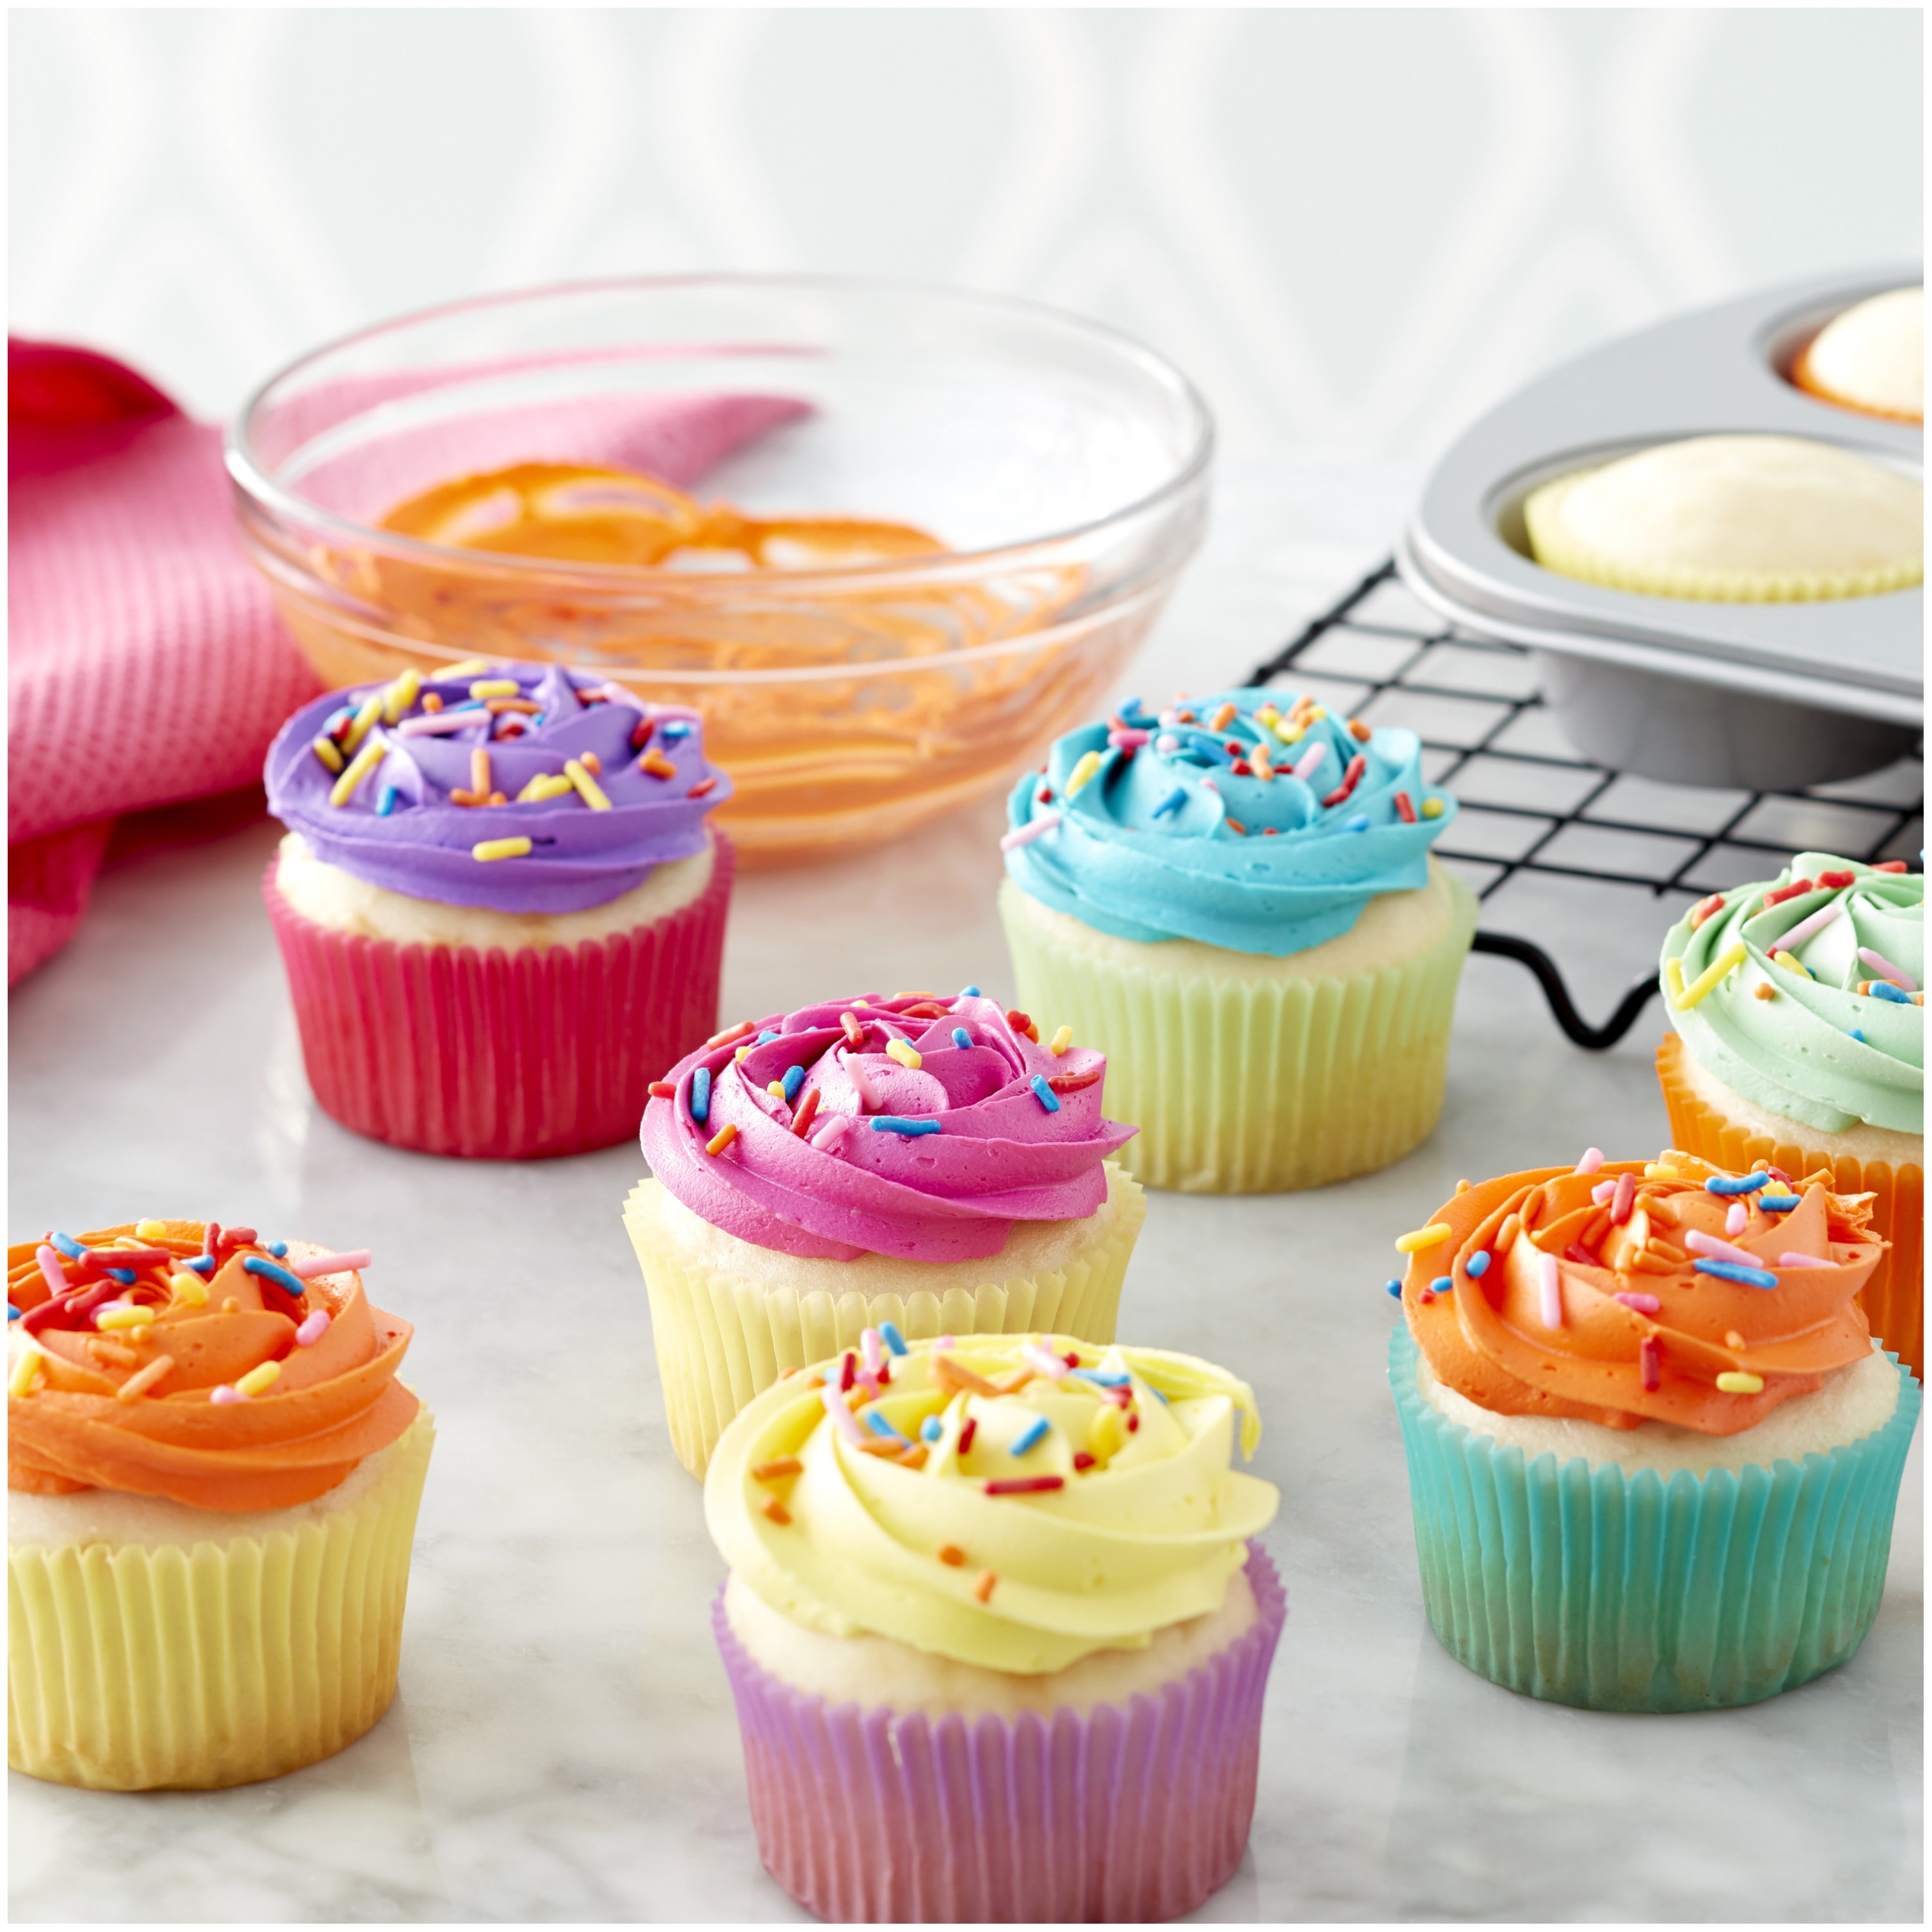 White Cupcake Liners Standard Size - 300-Pack Paper Baking Cups – KPKitchen